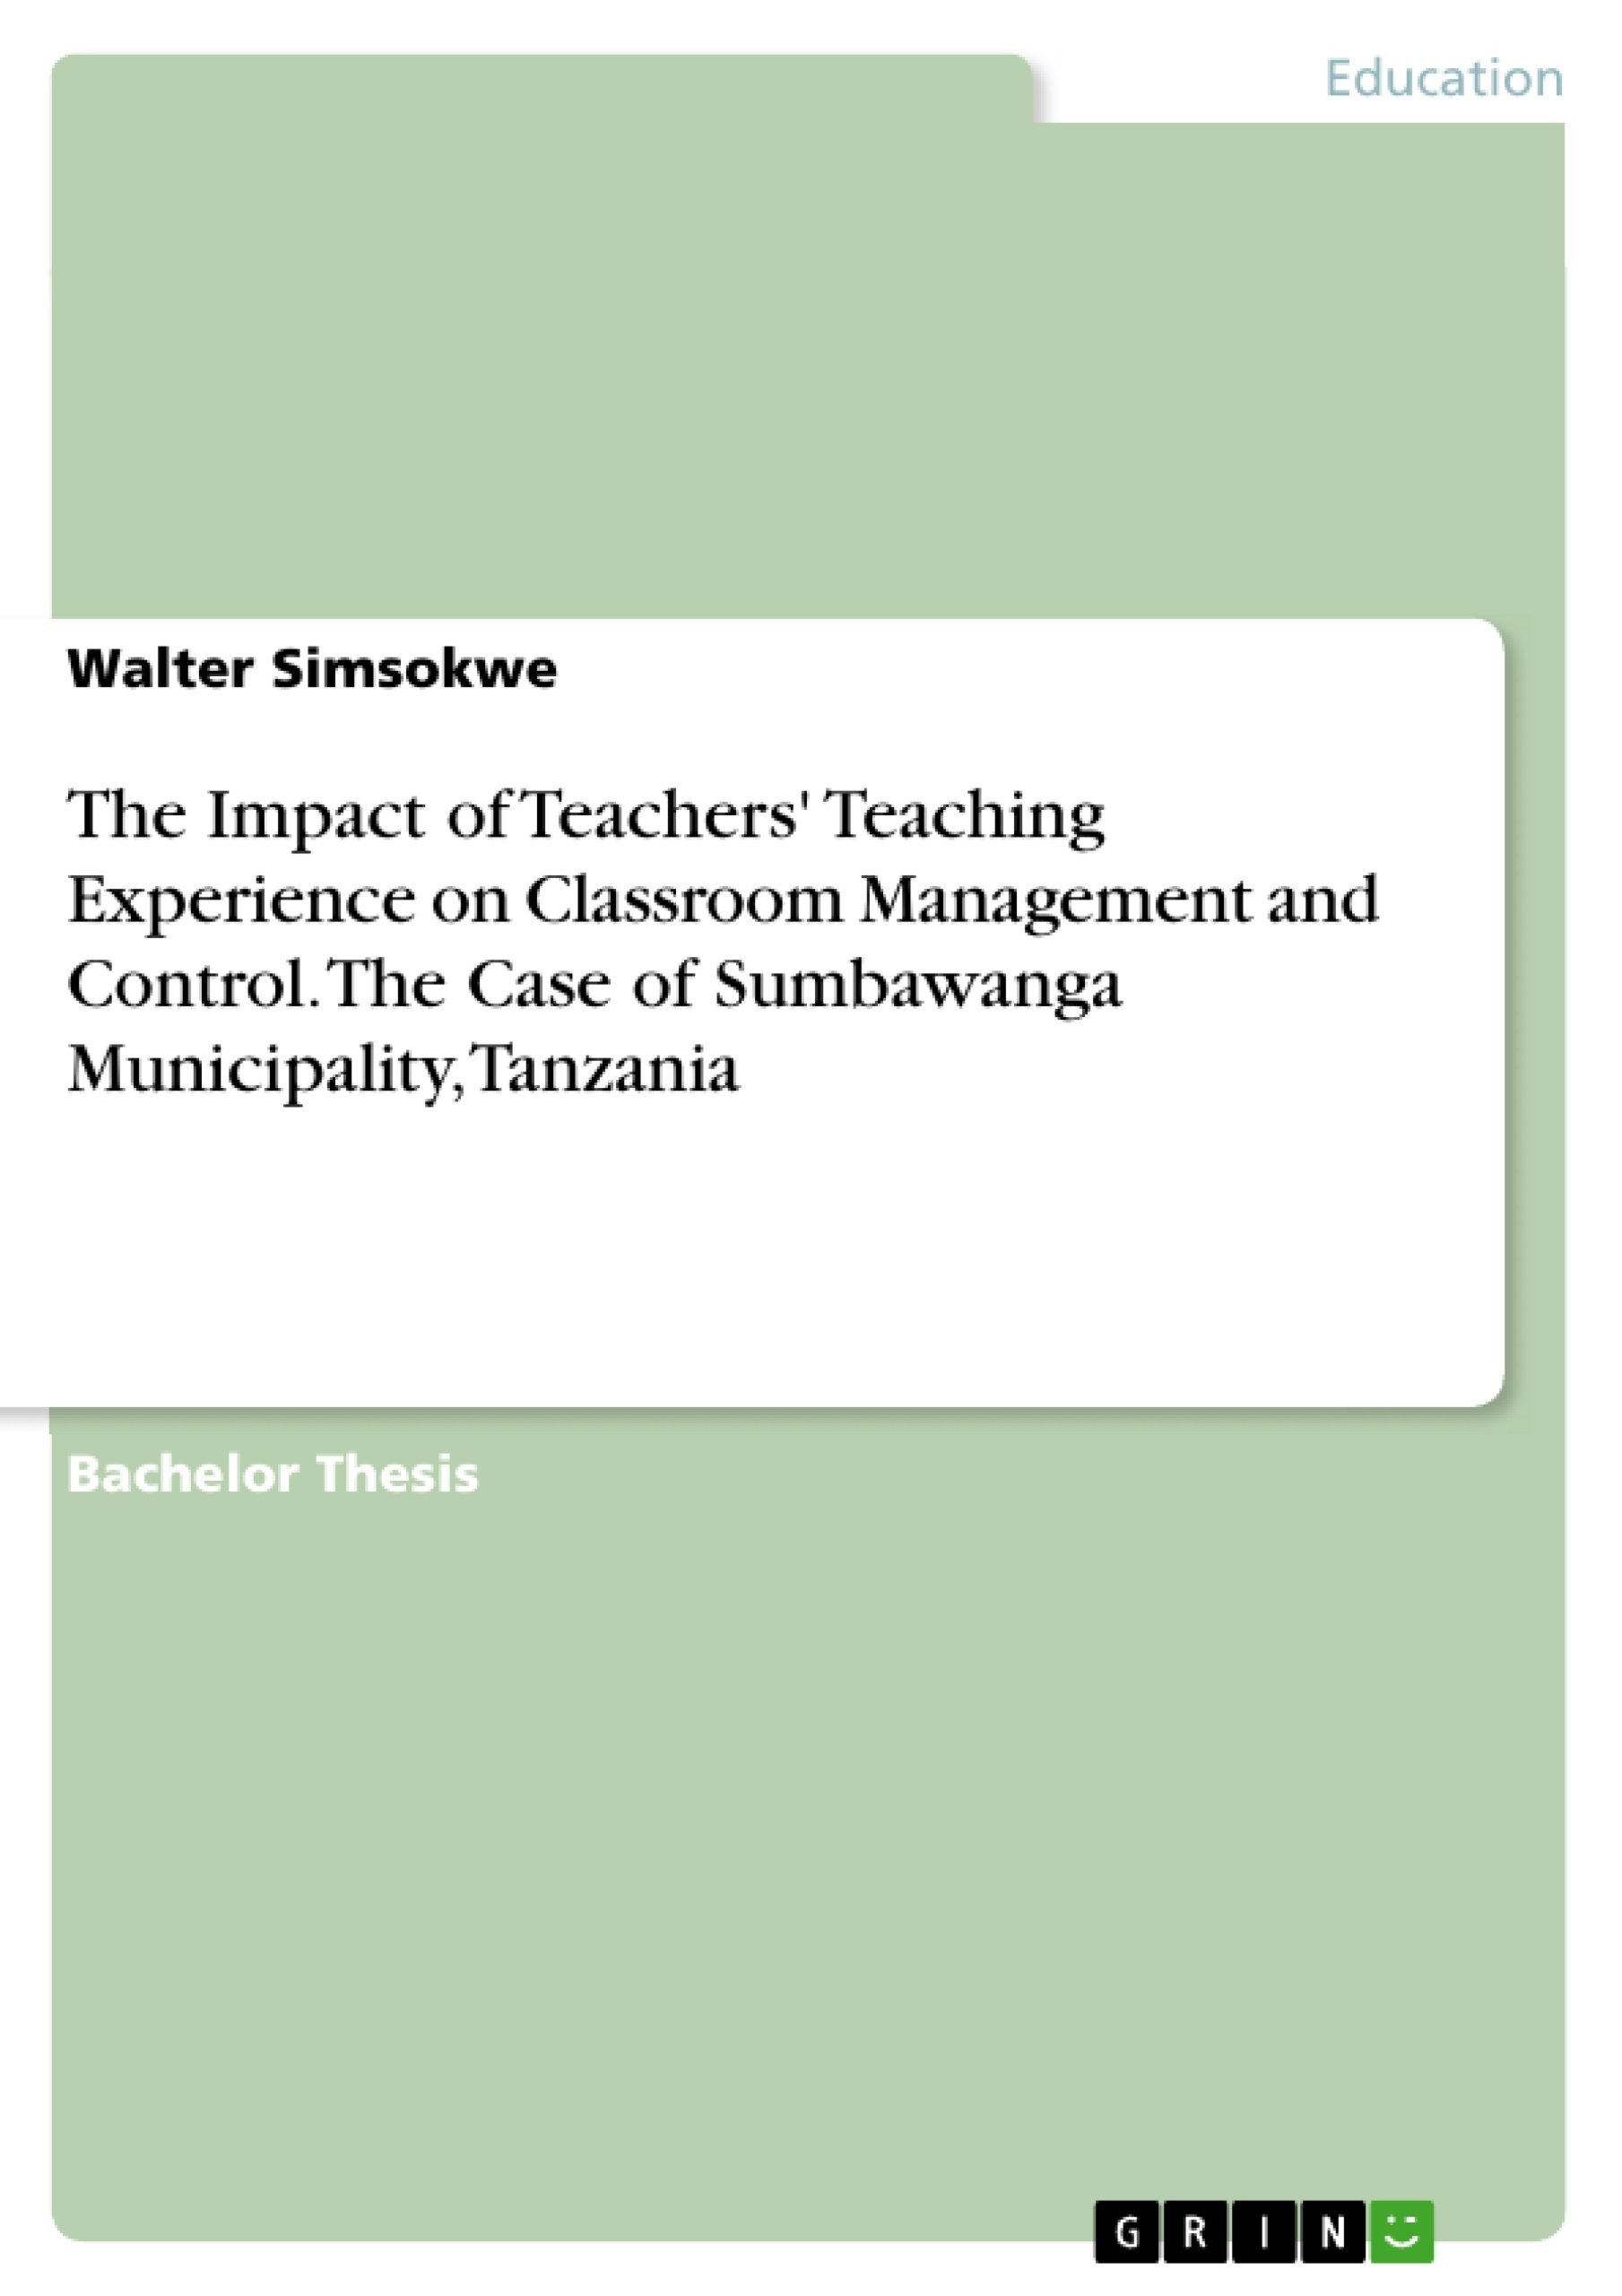 Title: The Impact of Teachers' Teaching Experience on Classroom Management and Control. The Case of Sumbawanga Municipality, Tanzania